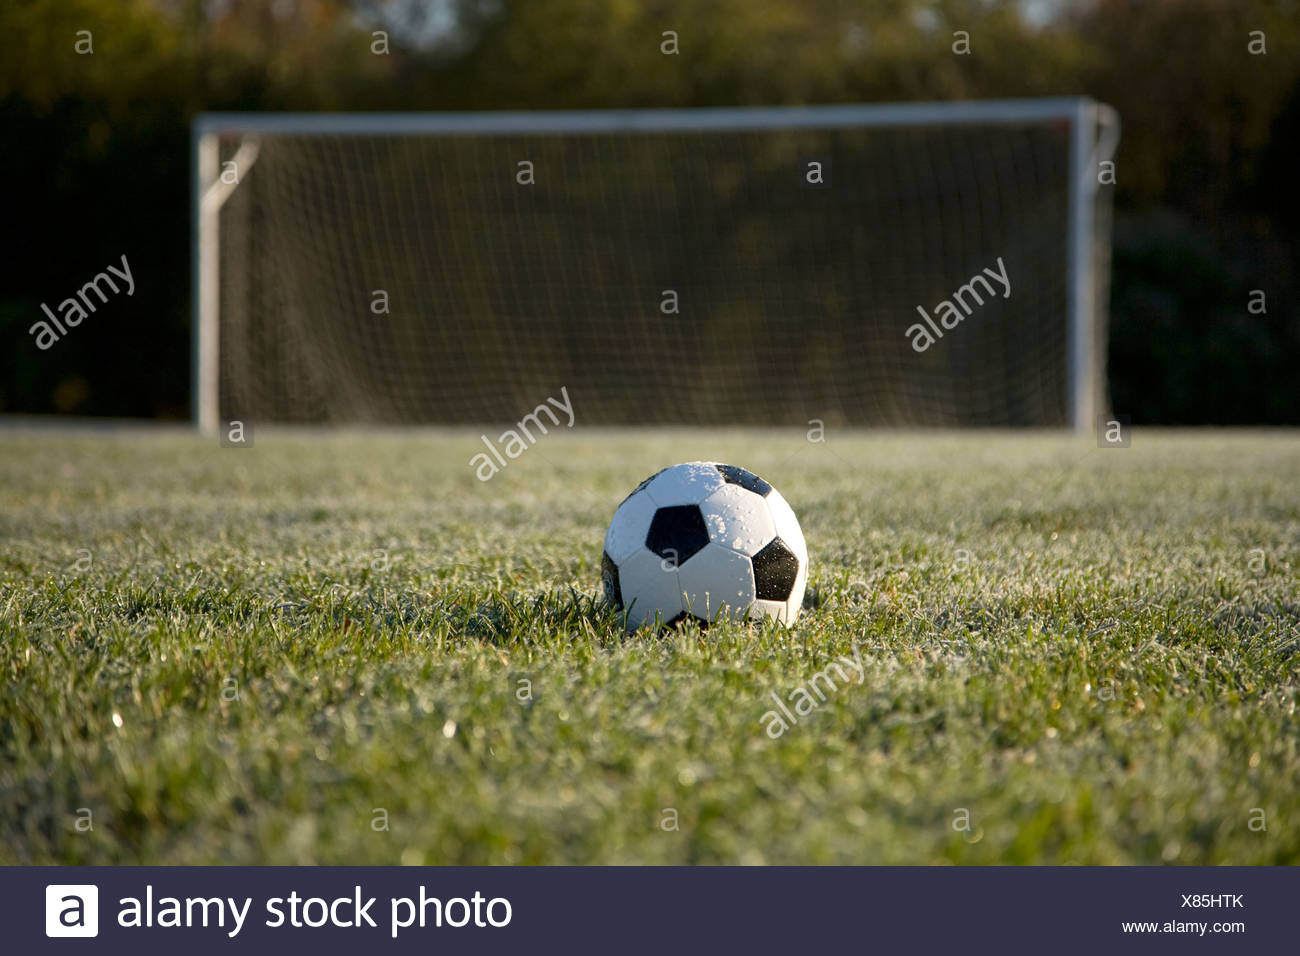 Soccer Ball On Field With Goal In Background Stock Photo Alamy